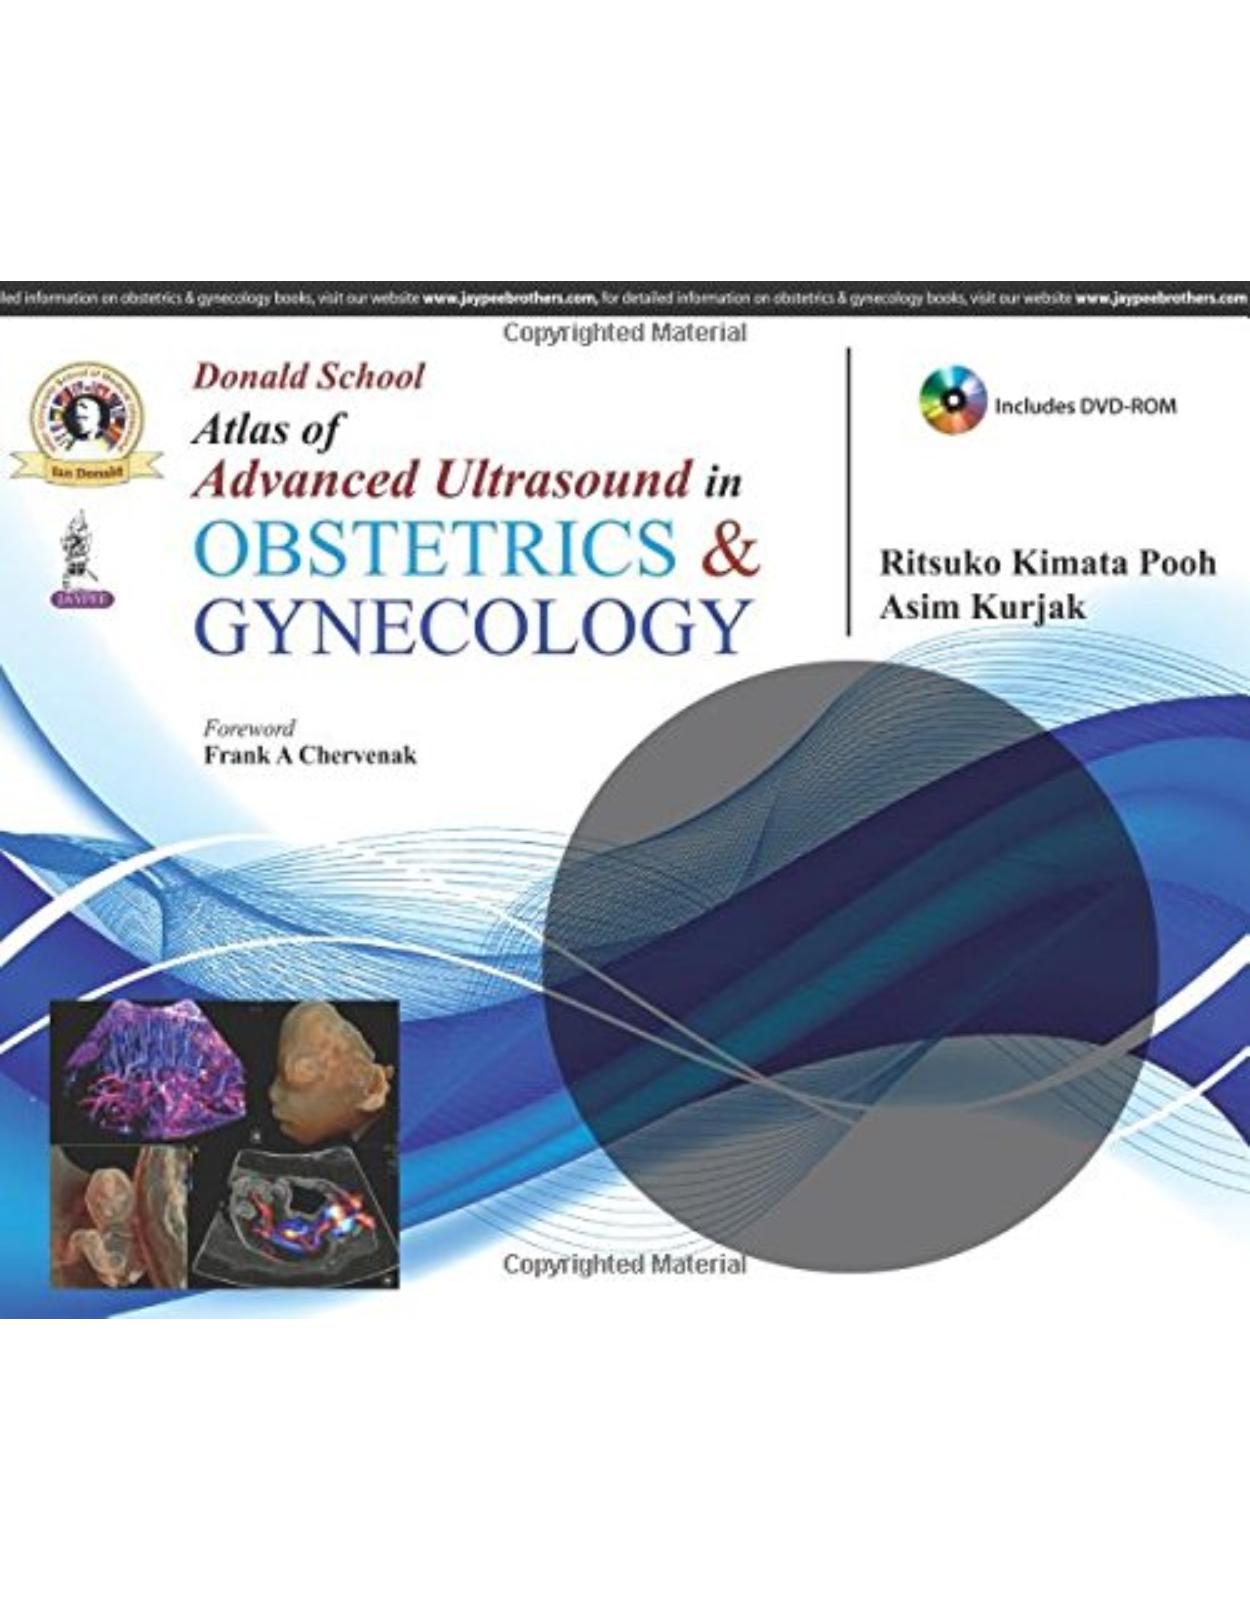 Donald School Atlas of Advanced Ultrasound in Obstetrics and Gynecology 